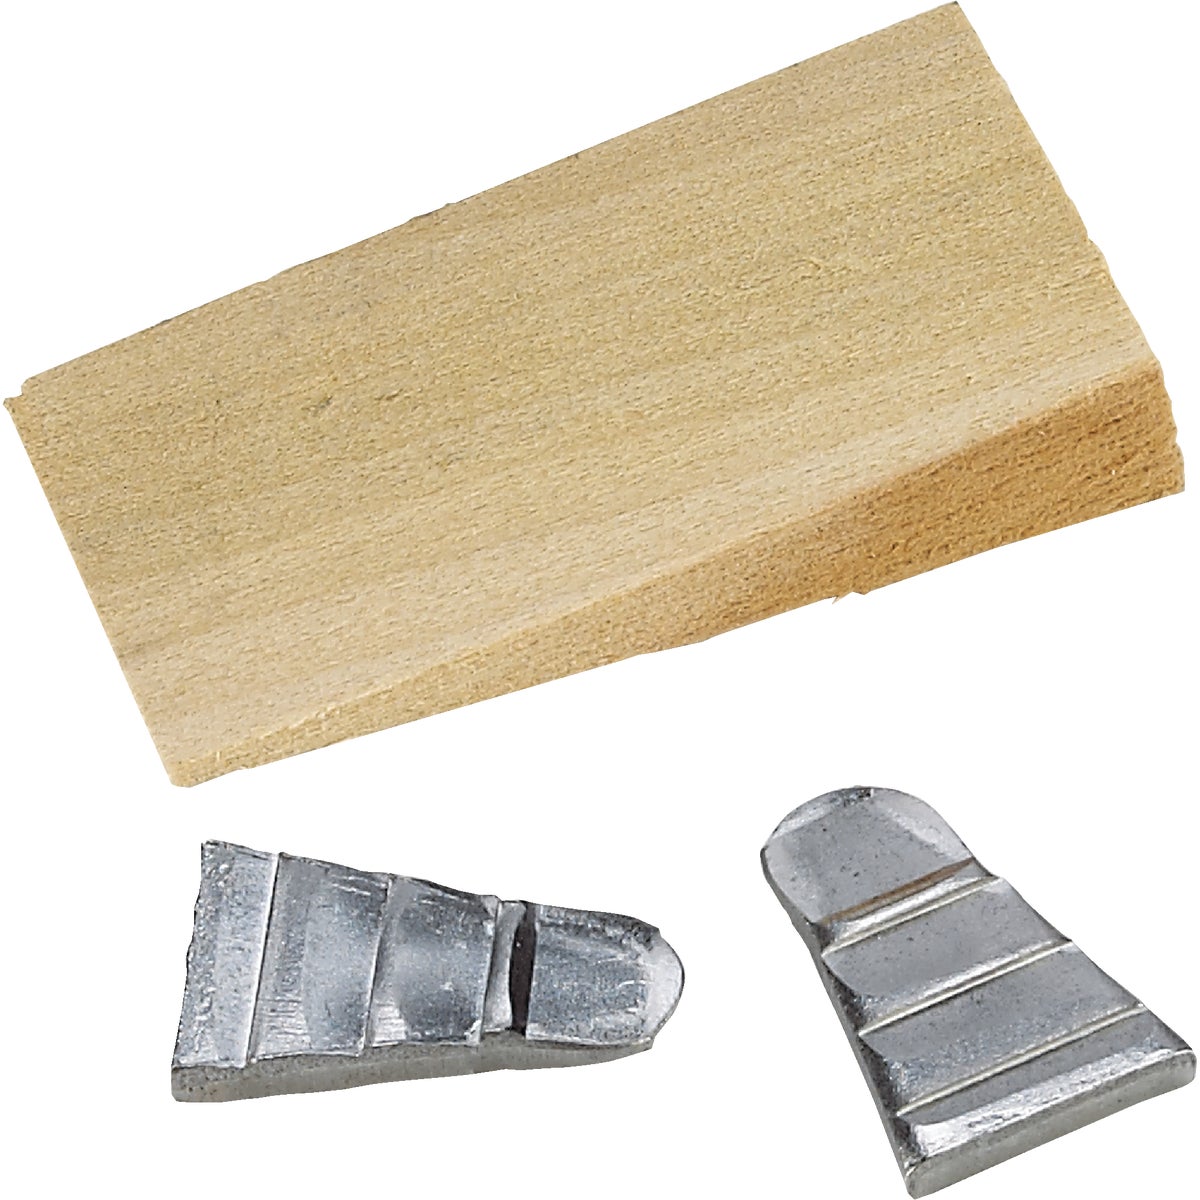 Do it Wood & Steel Handle Wedge for Sledge or Maul (3-Pack)